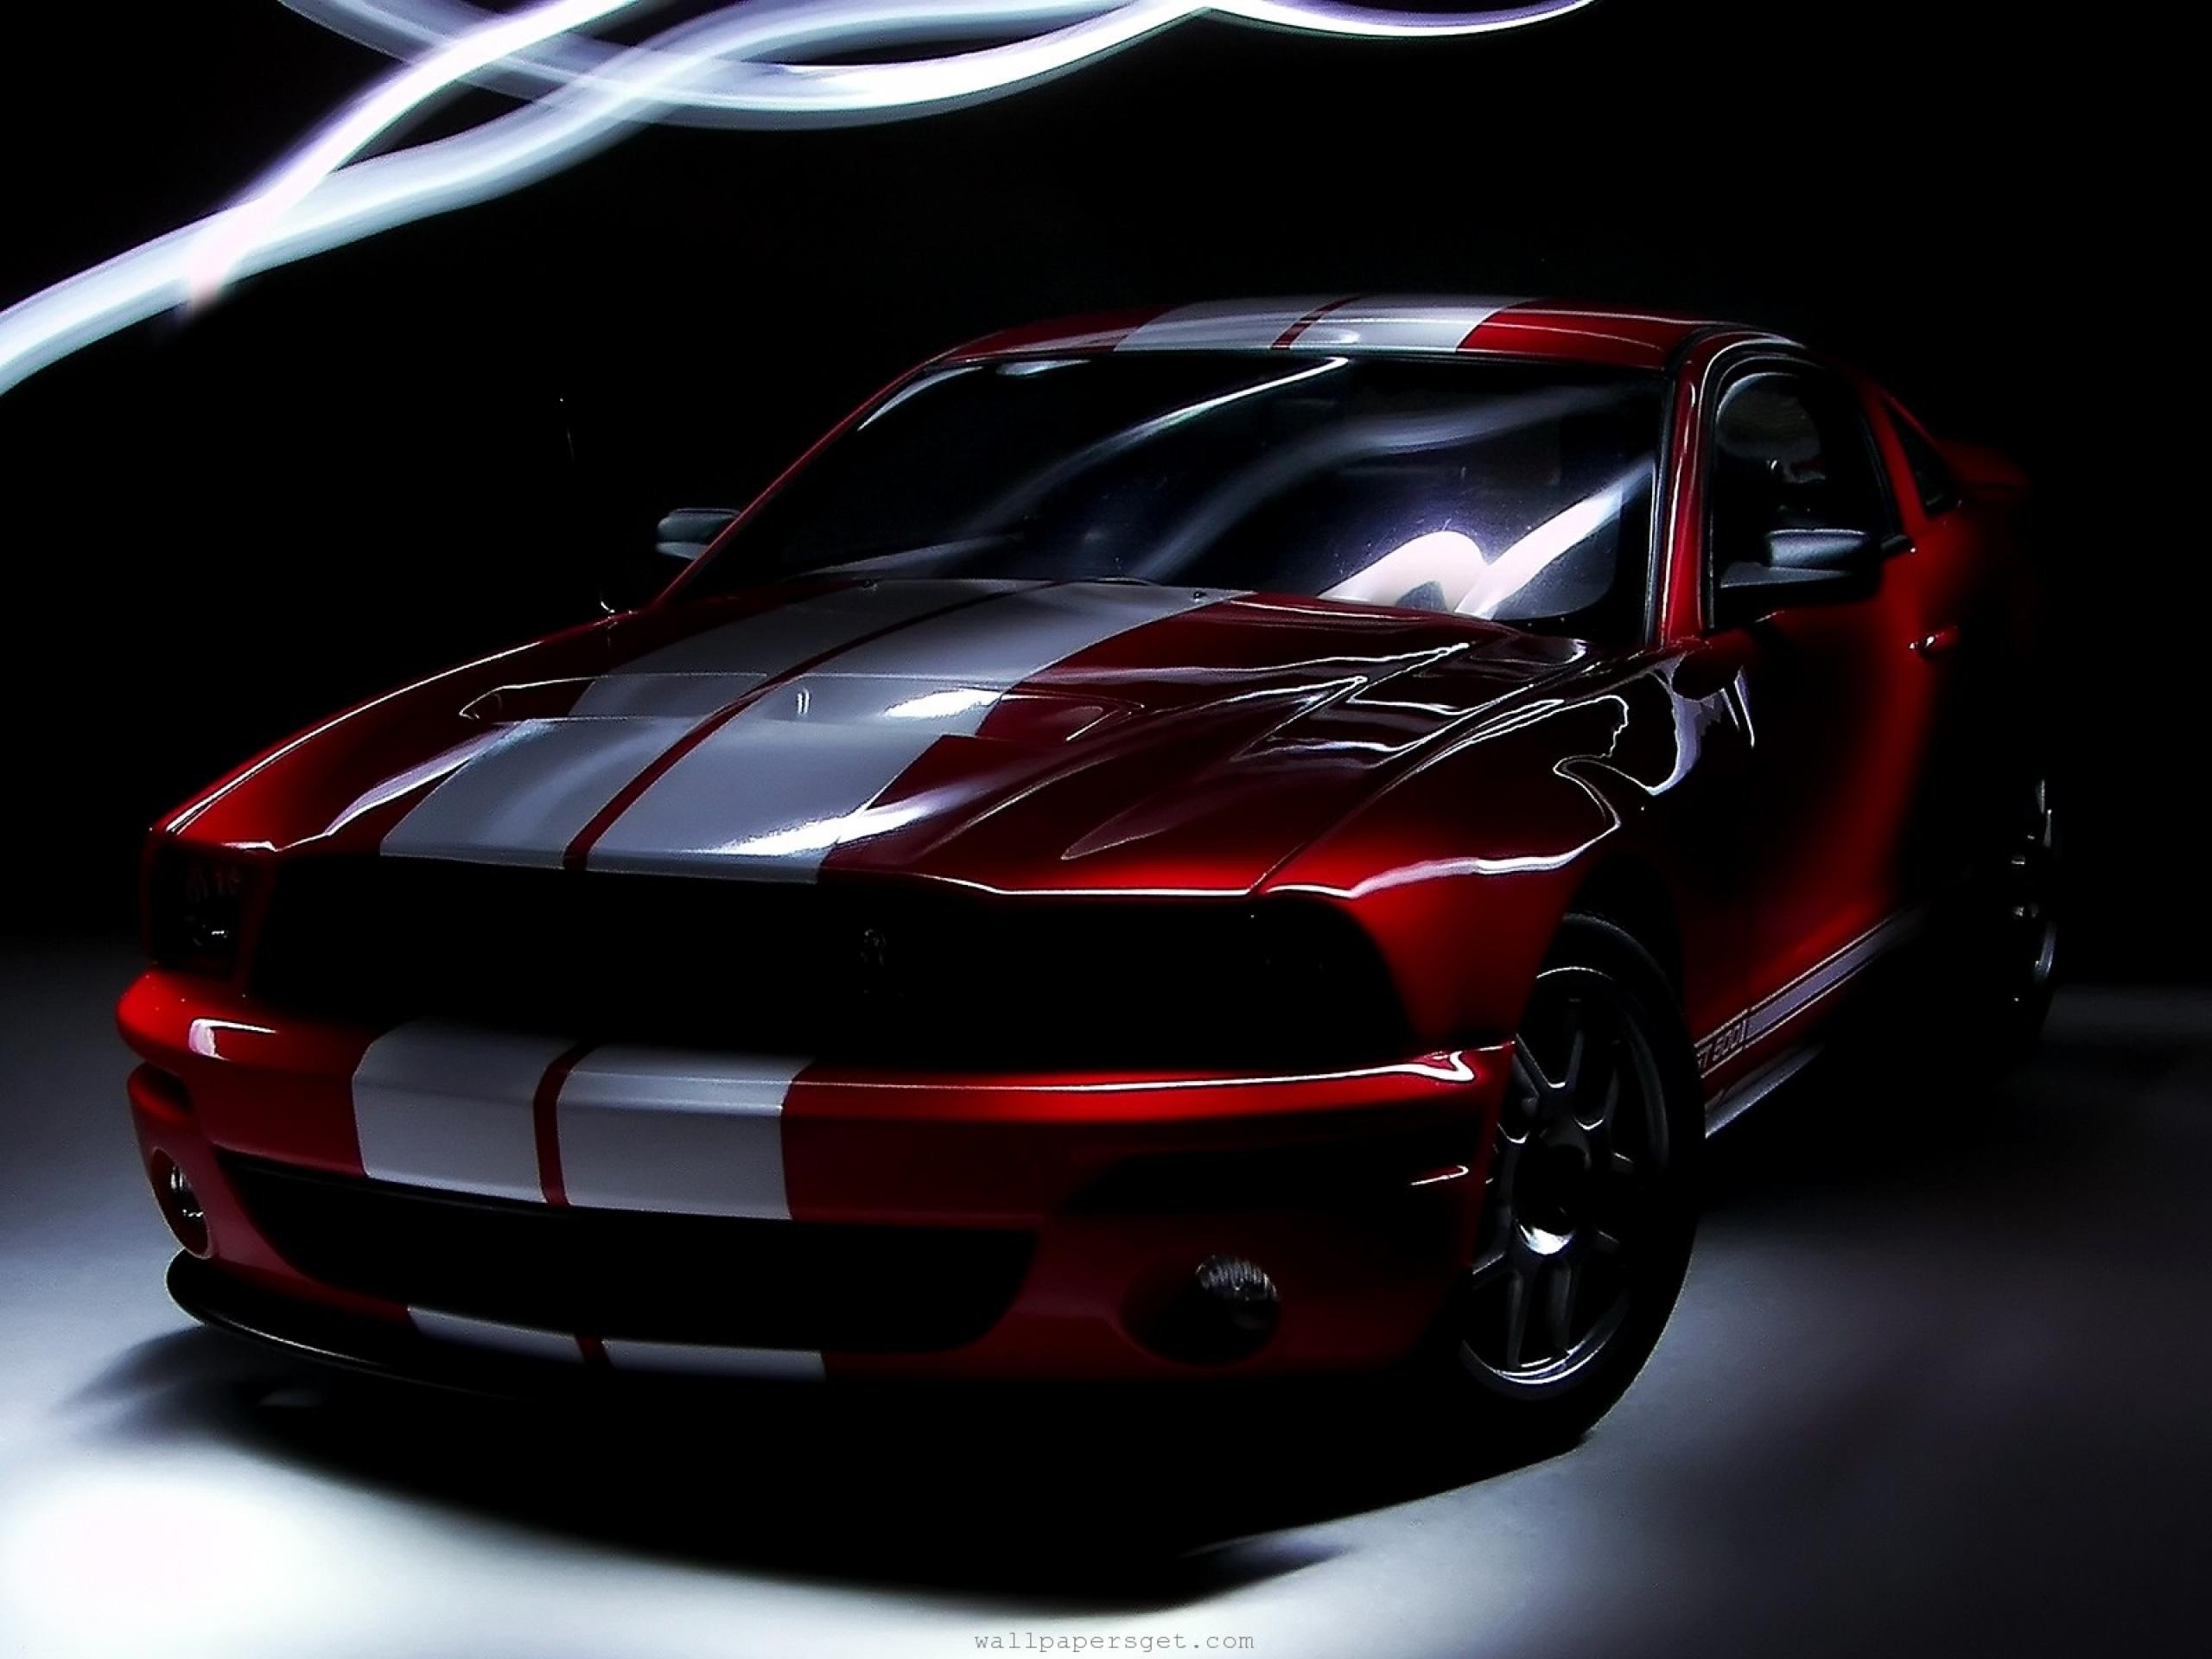 american, Muscle, Cars, Front, Coupe, Ford, Shelby, Famous, Shelby, Gt500 Wallpaper